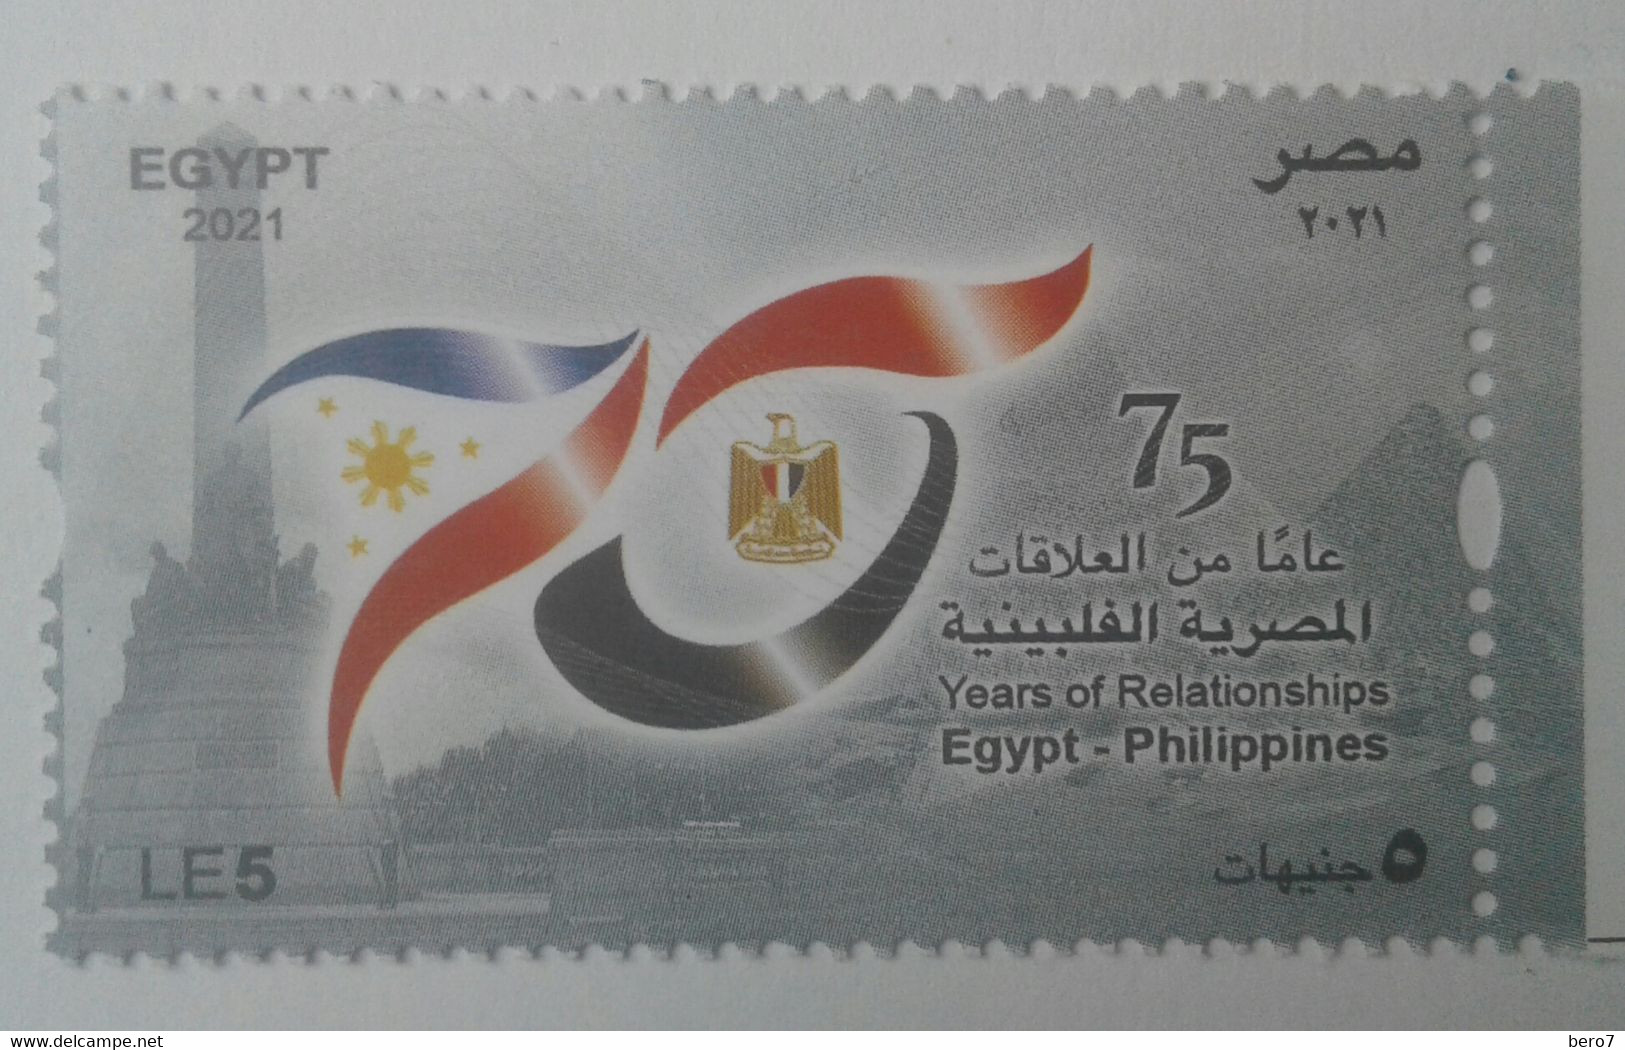 Egypt-Diplomatic Relations With The Philippines, 75th Anniversary- (Unused) (MNH) - [2021] (Egypte) (Egitto) (Ägypten) - Ungebraucht